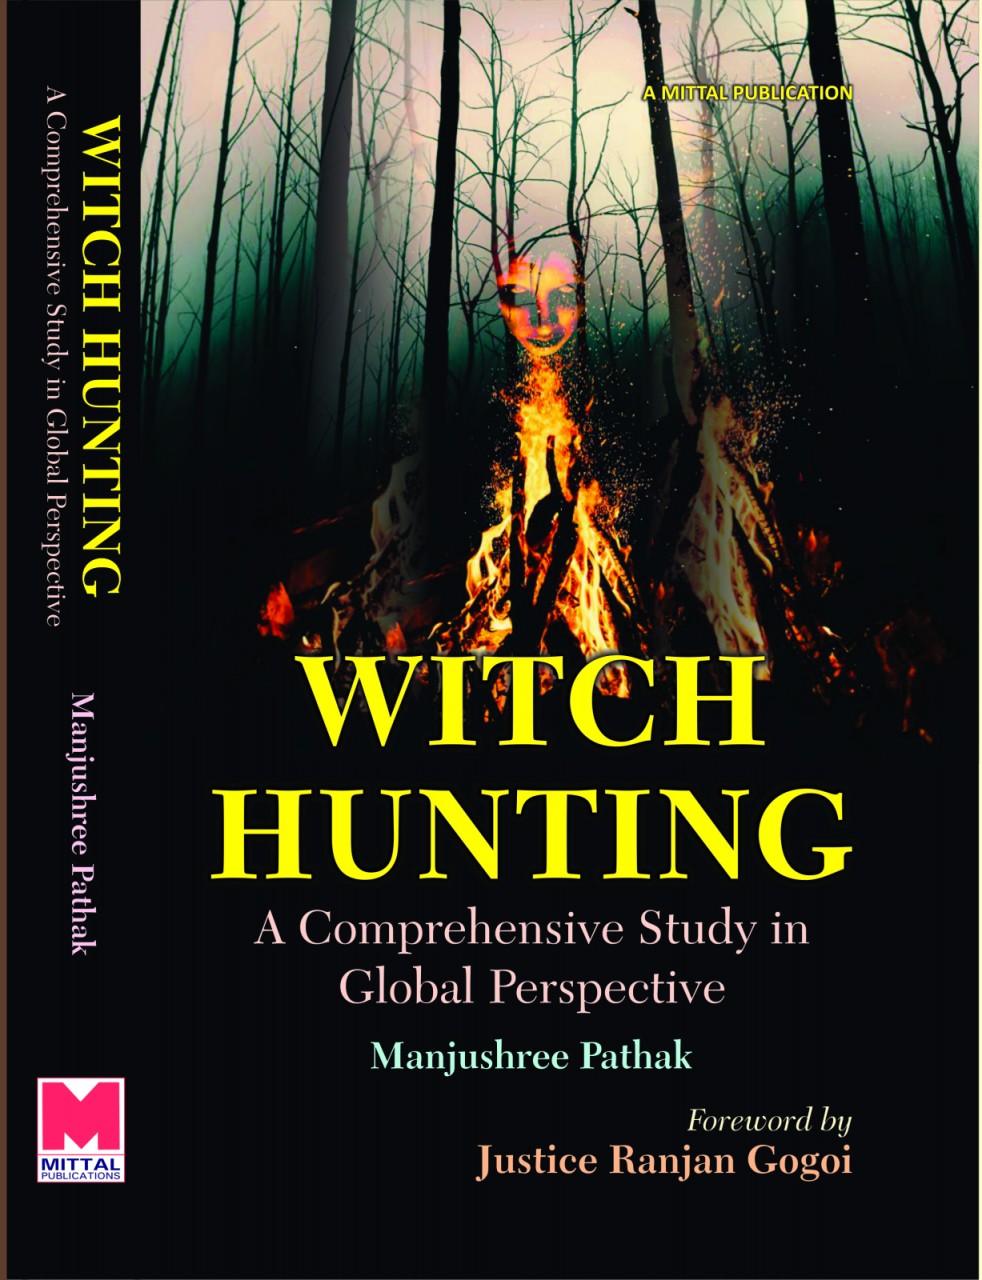 Witch Hunting: A Comprehensive Study in Global Perspective.